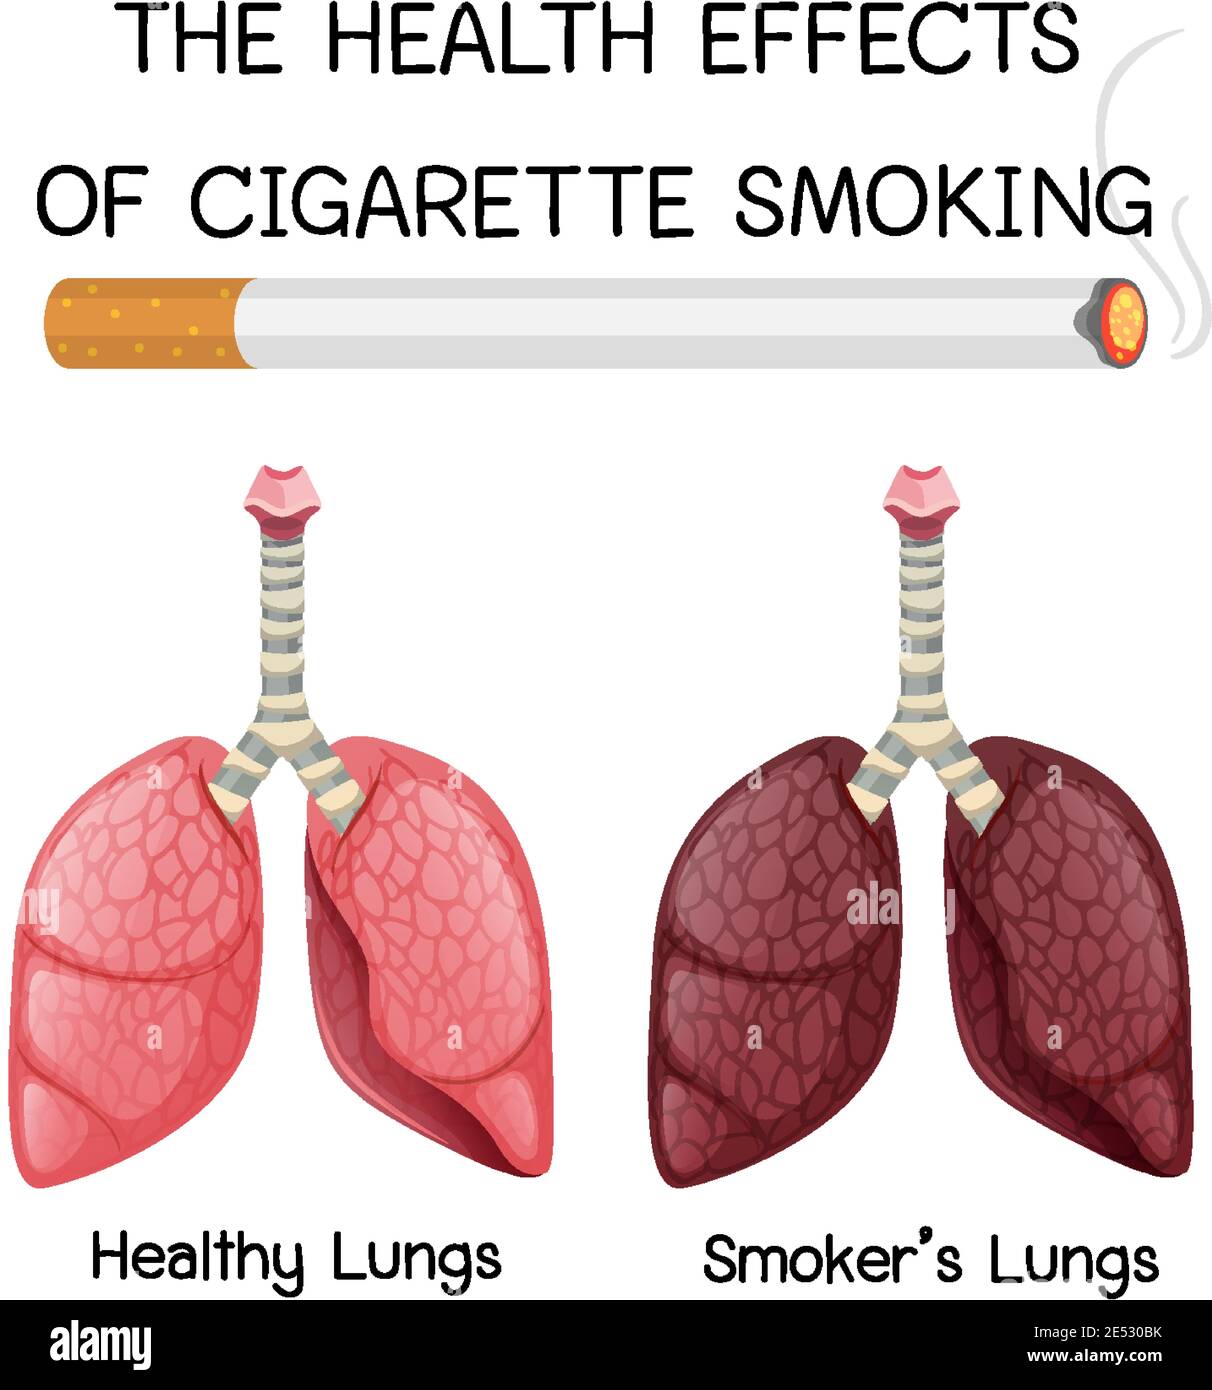 smoking cigarettes effects